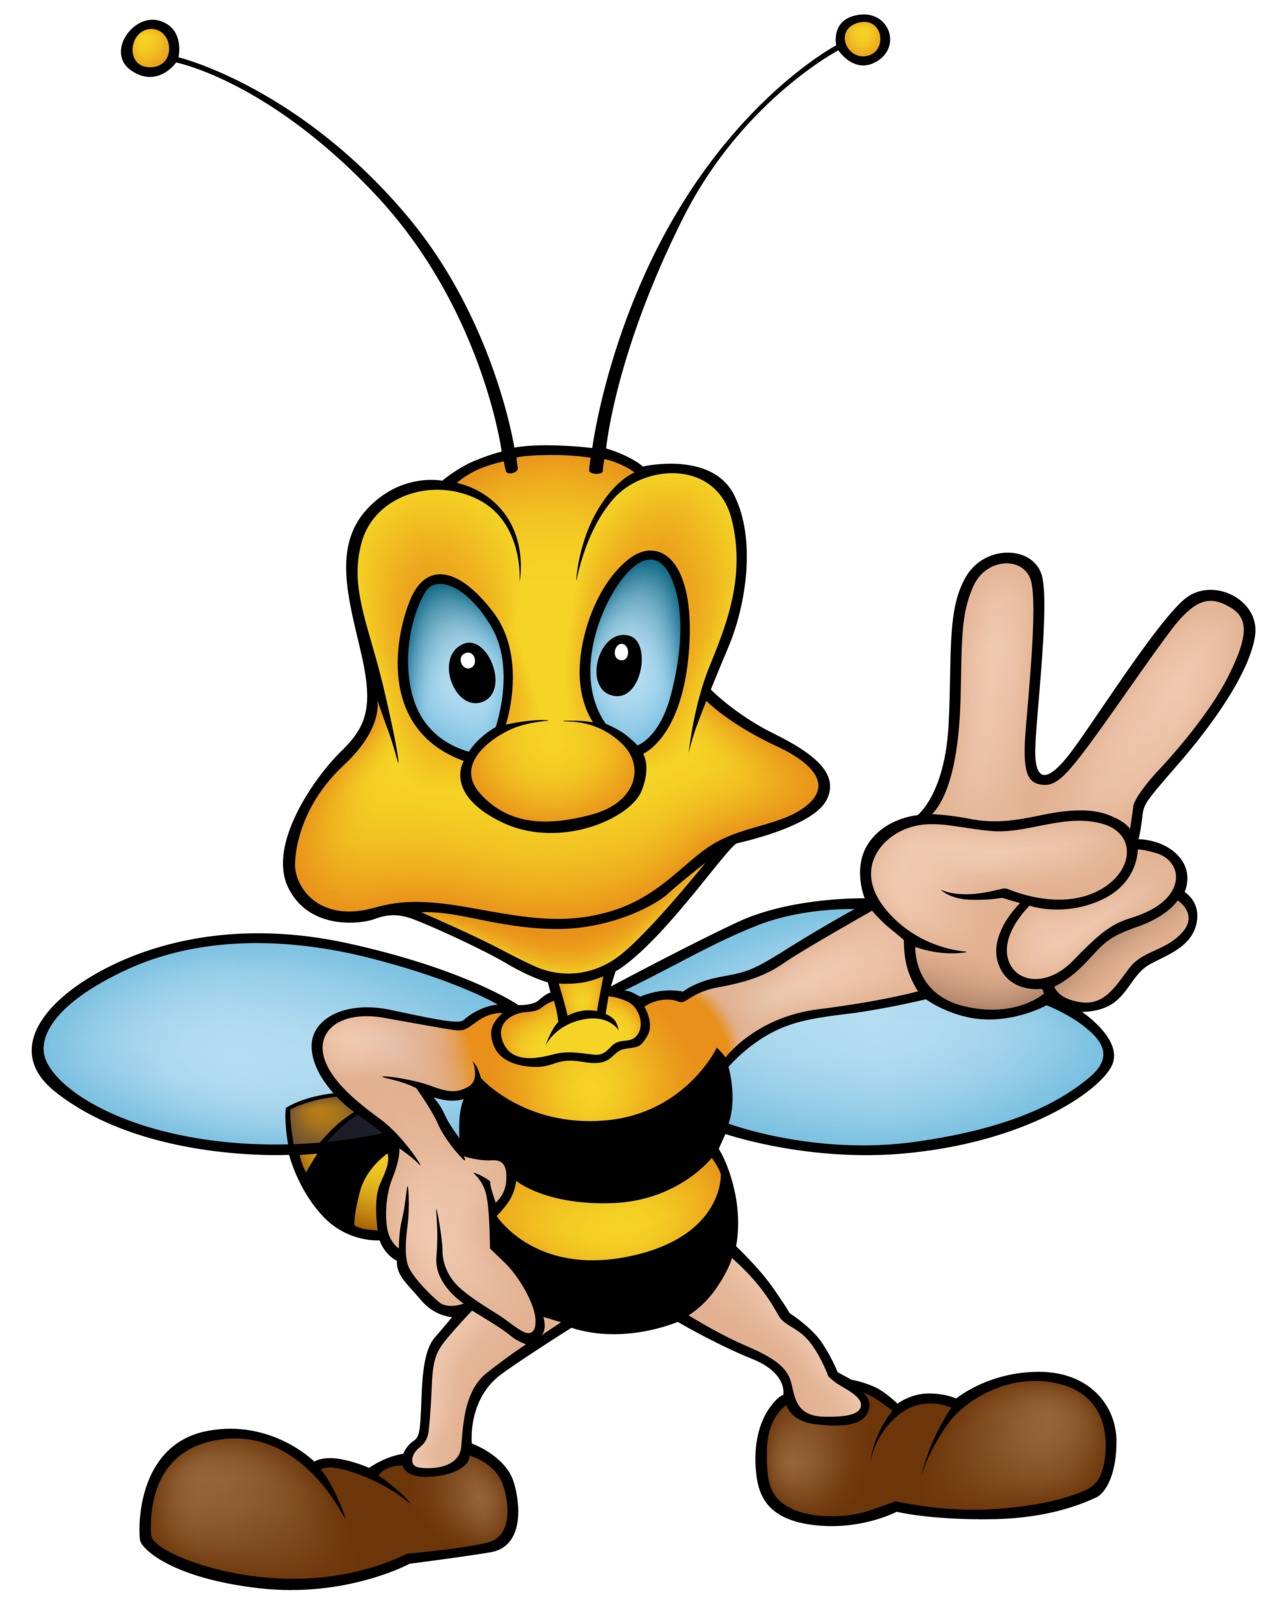 Wasp Gesturing Victory - Colored Cartoon Illustration, Vector